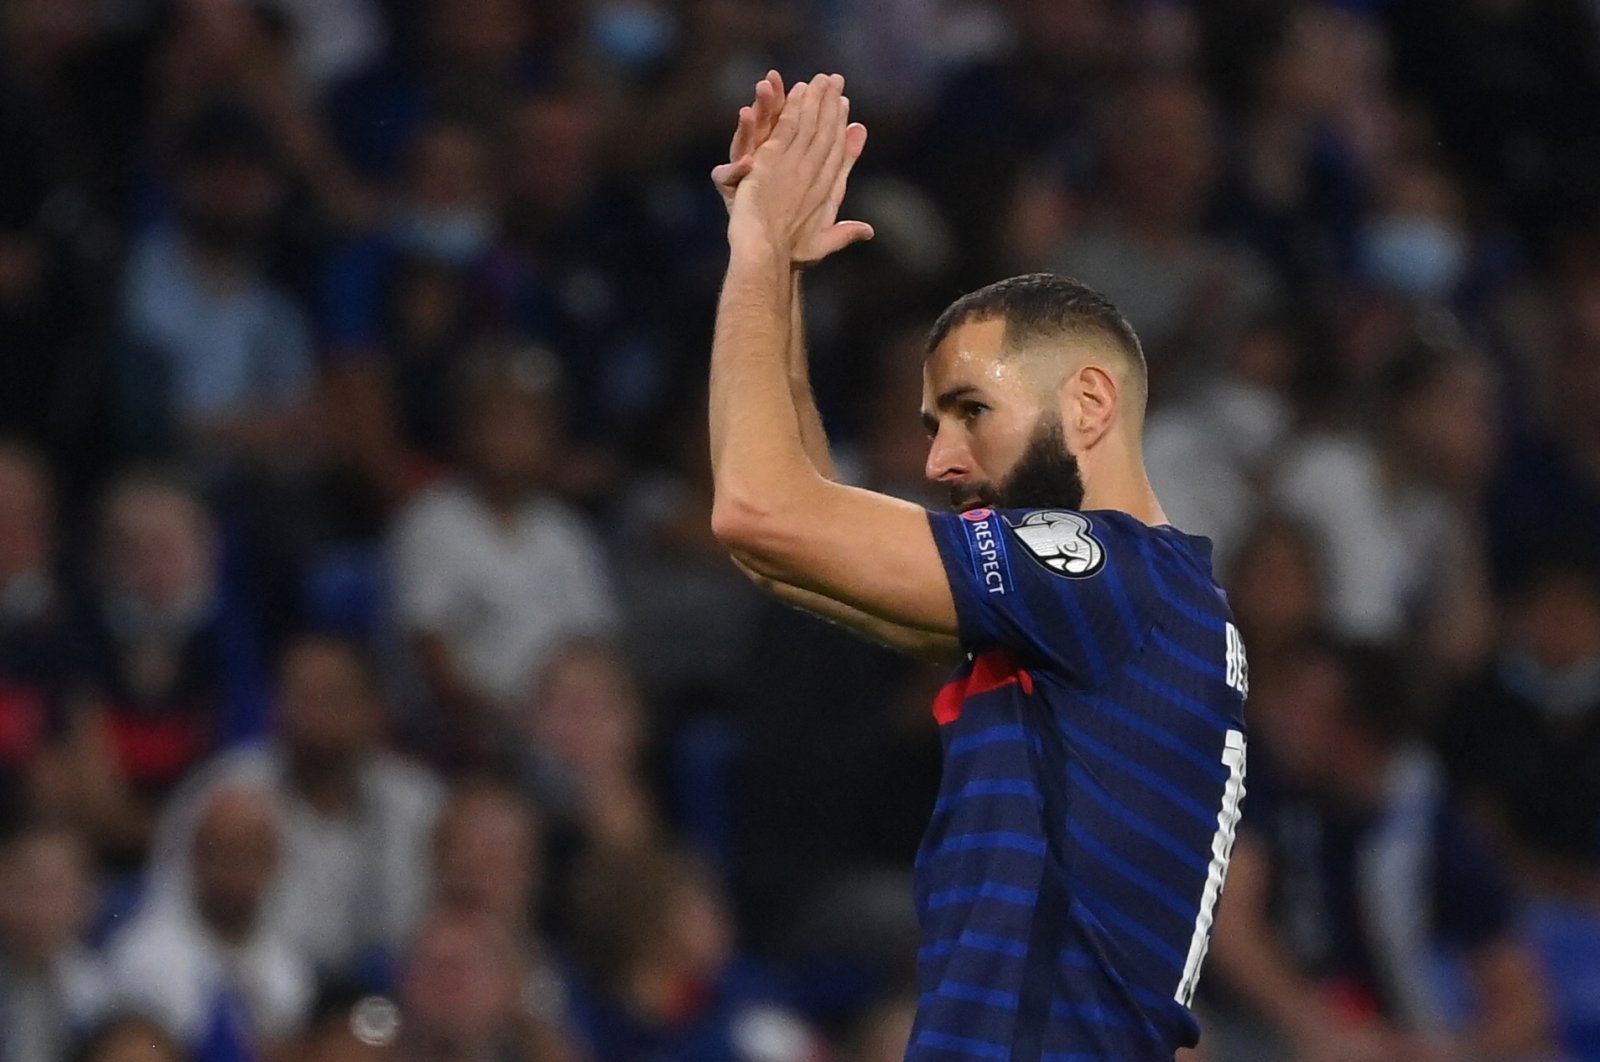 France&#039;s forward Karim Benzema applauds during the FIFA World Cup Qatar 2022 Group D qualification football match between France and Finland at the Groupama stadium in Decines-Charpieu, Lyon, France, Sept. 7, 2021. (AFP Photo)